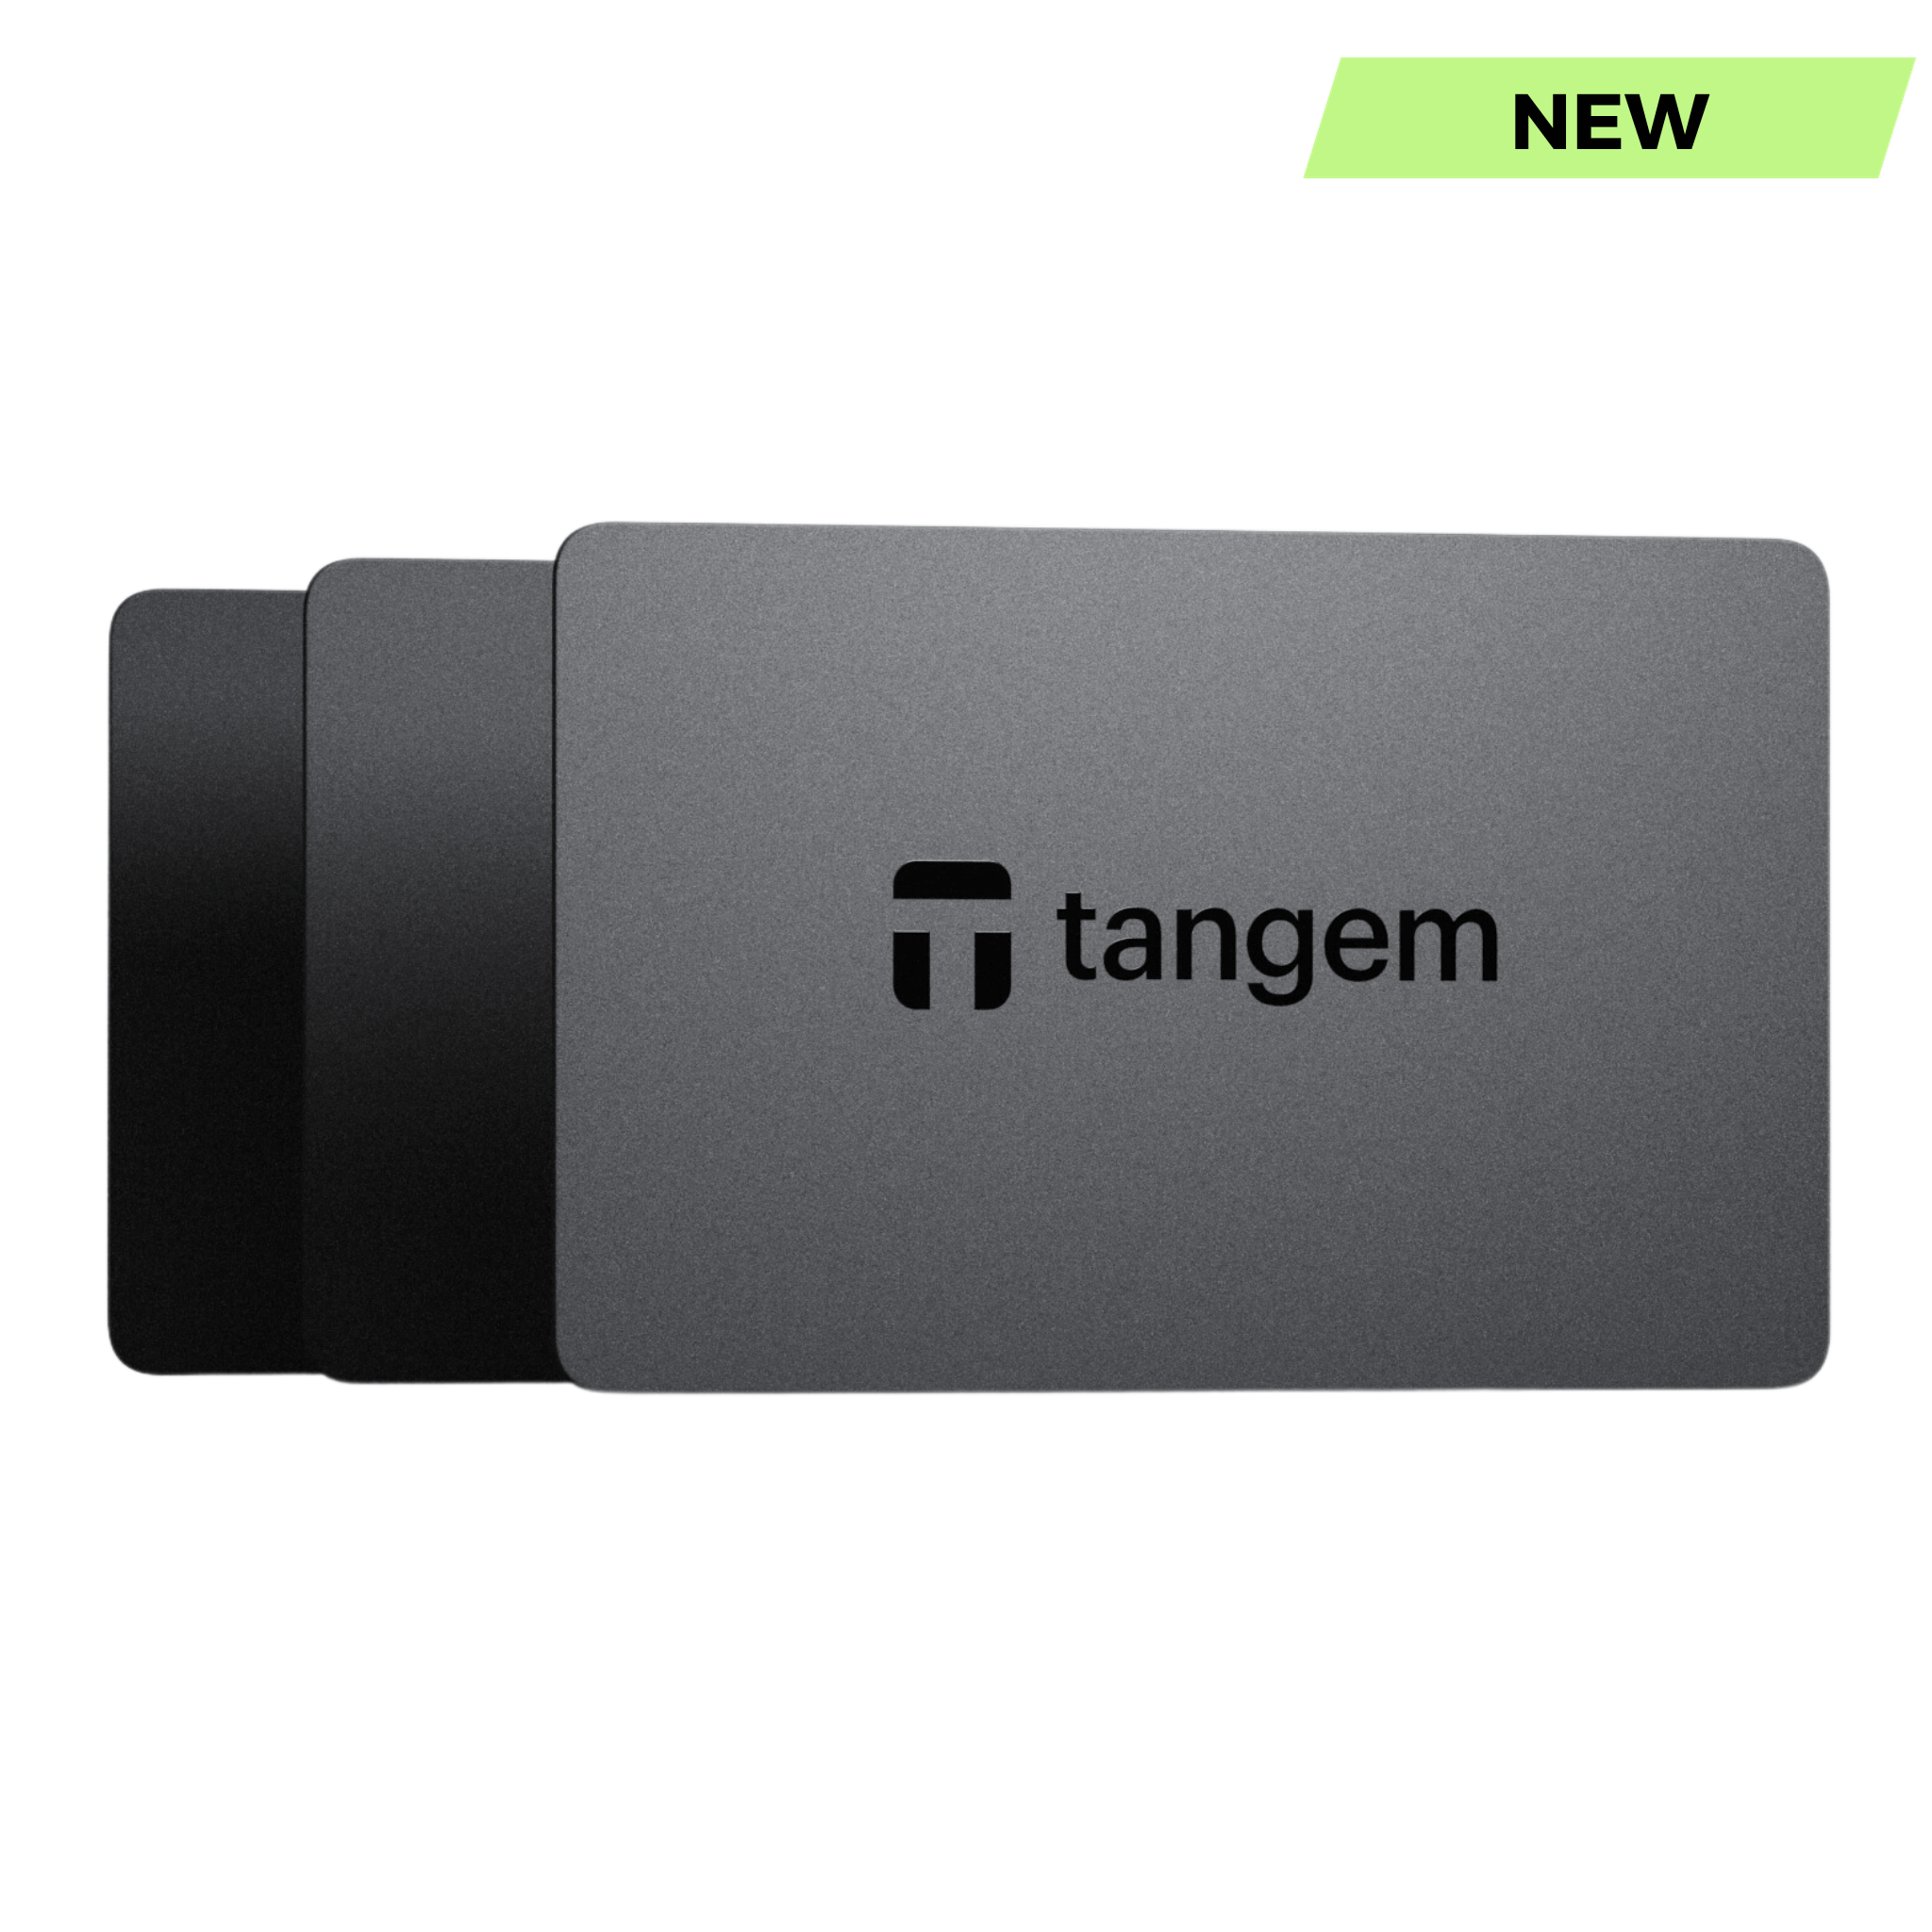 Tangem Wallet 2.0 3 Card Cryptocurrency Hardware Wallet New